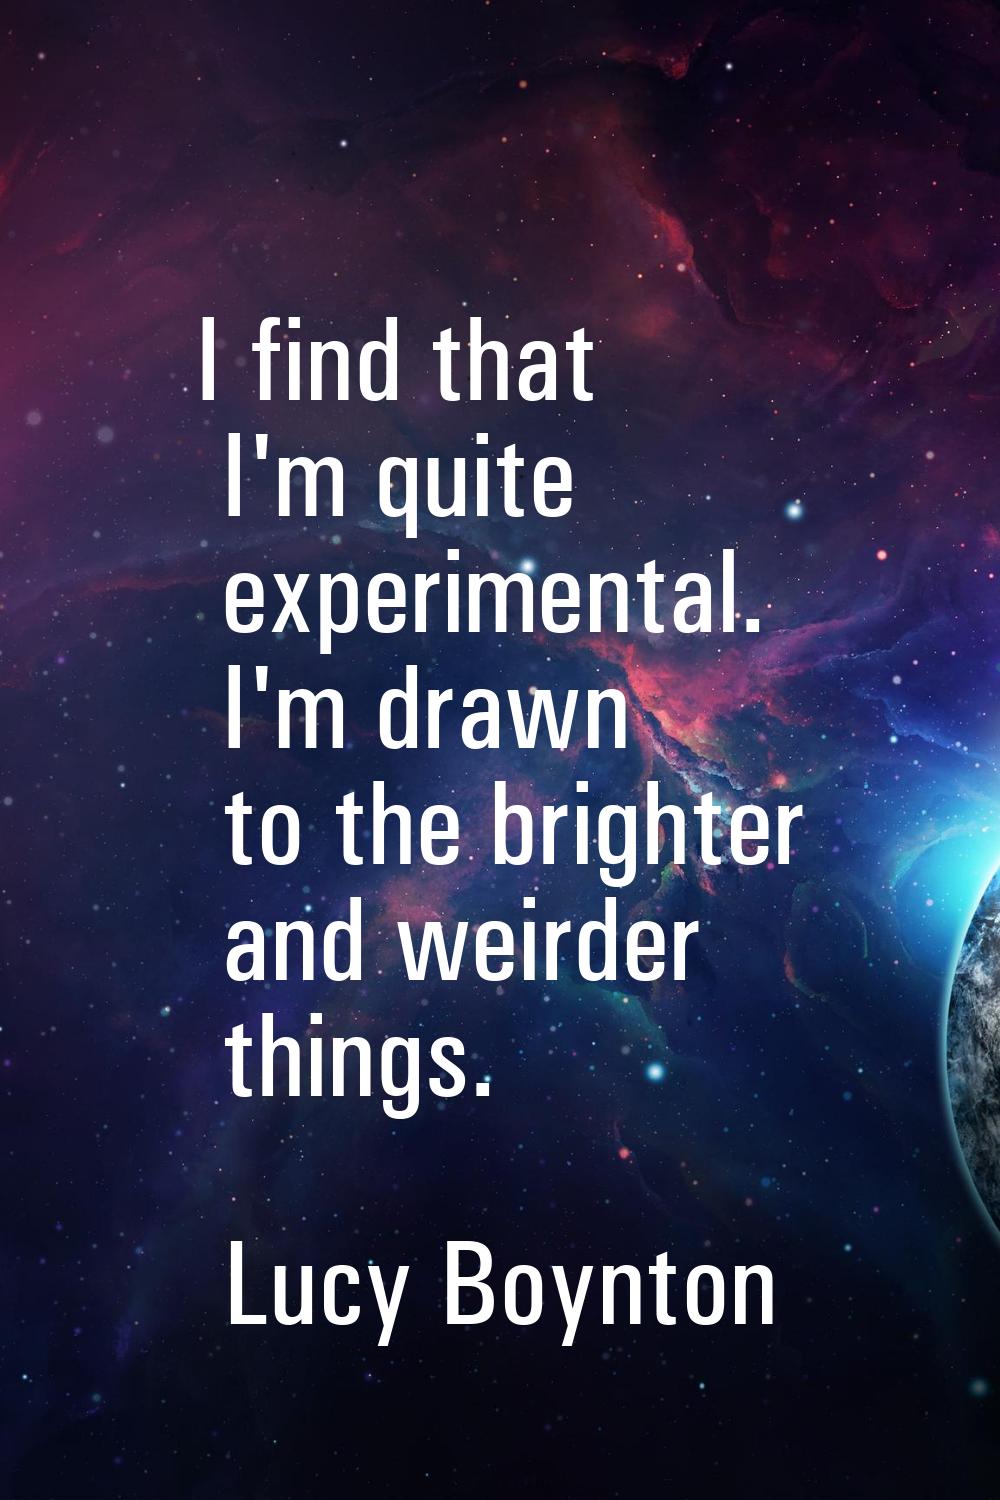 I find that I'm quite experimental. I'm drawn to the brighter and weirder things.